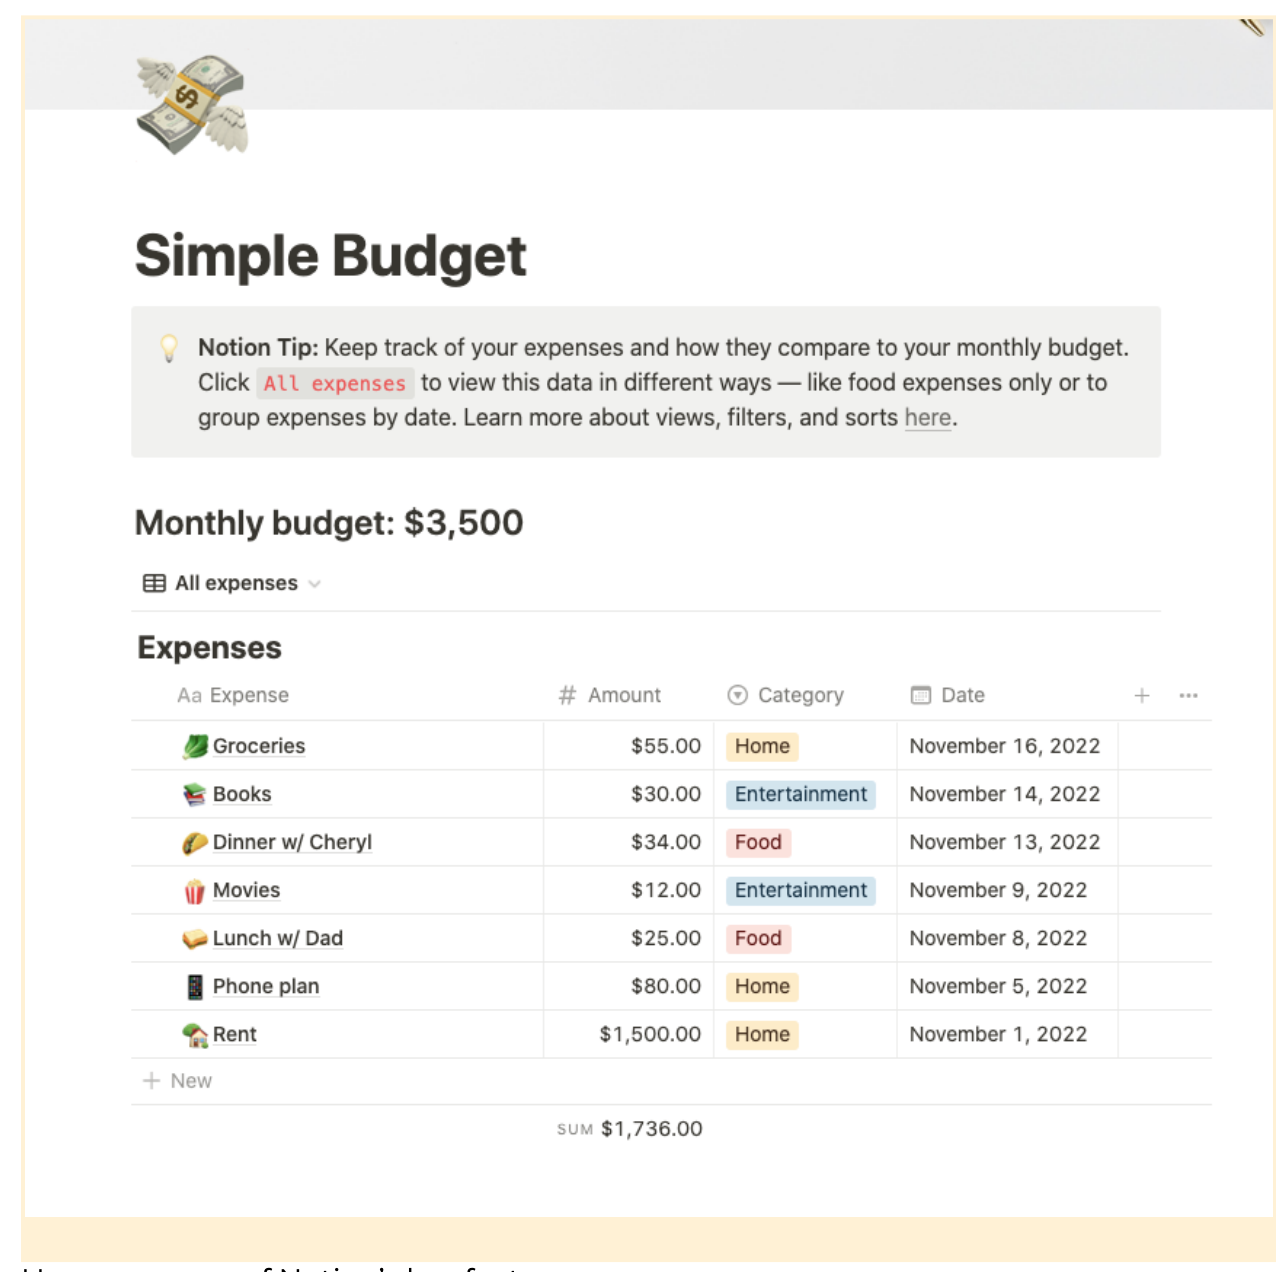 Notion's Simple Budget template